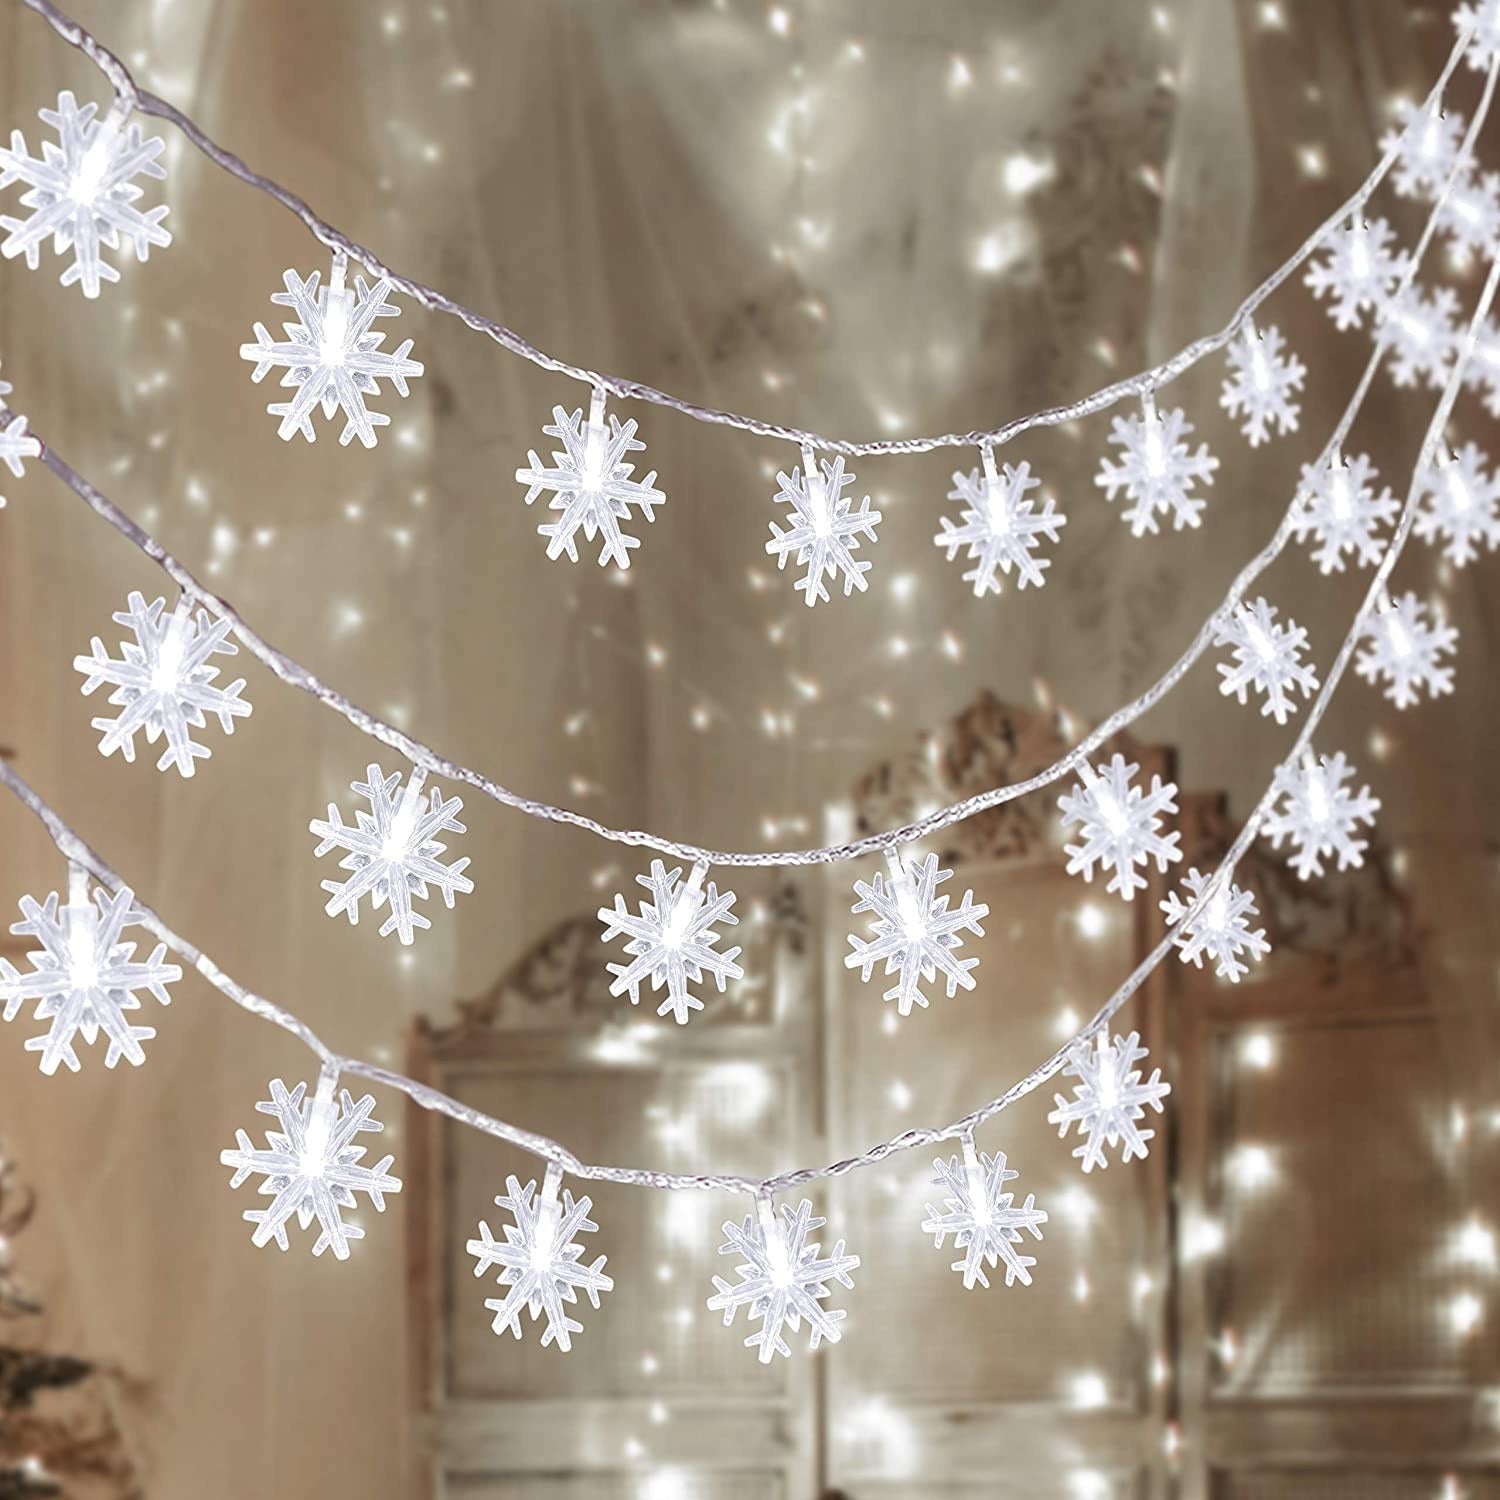 Turn Your Home Into a Winter Wonderland With These DIY Decorations